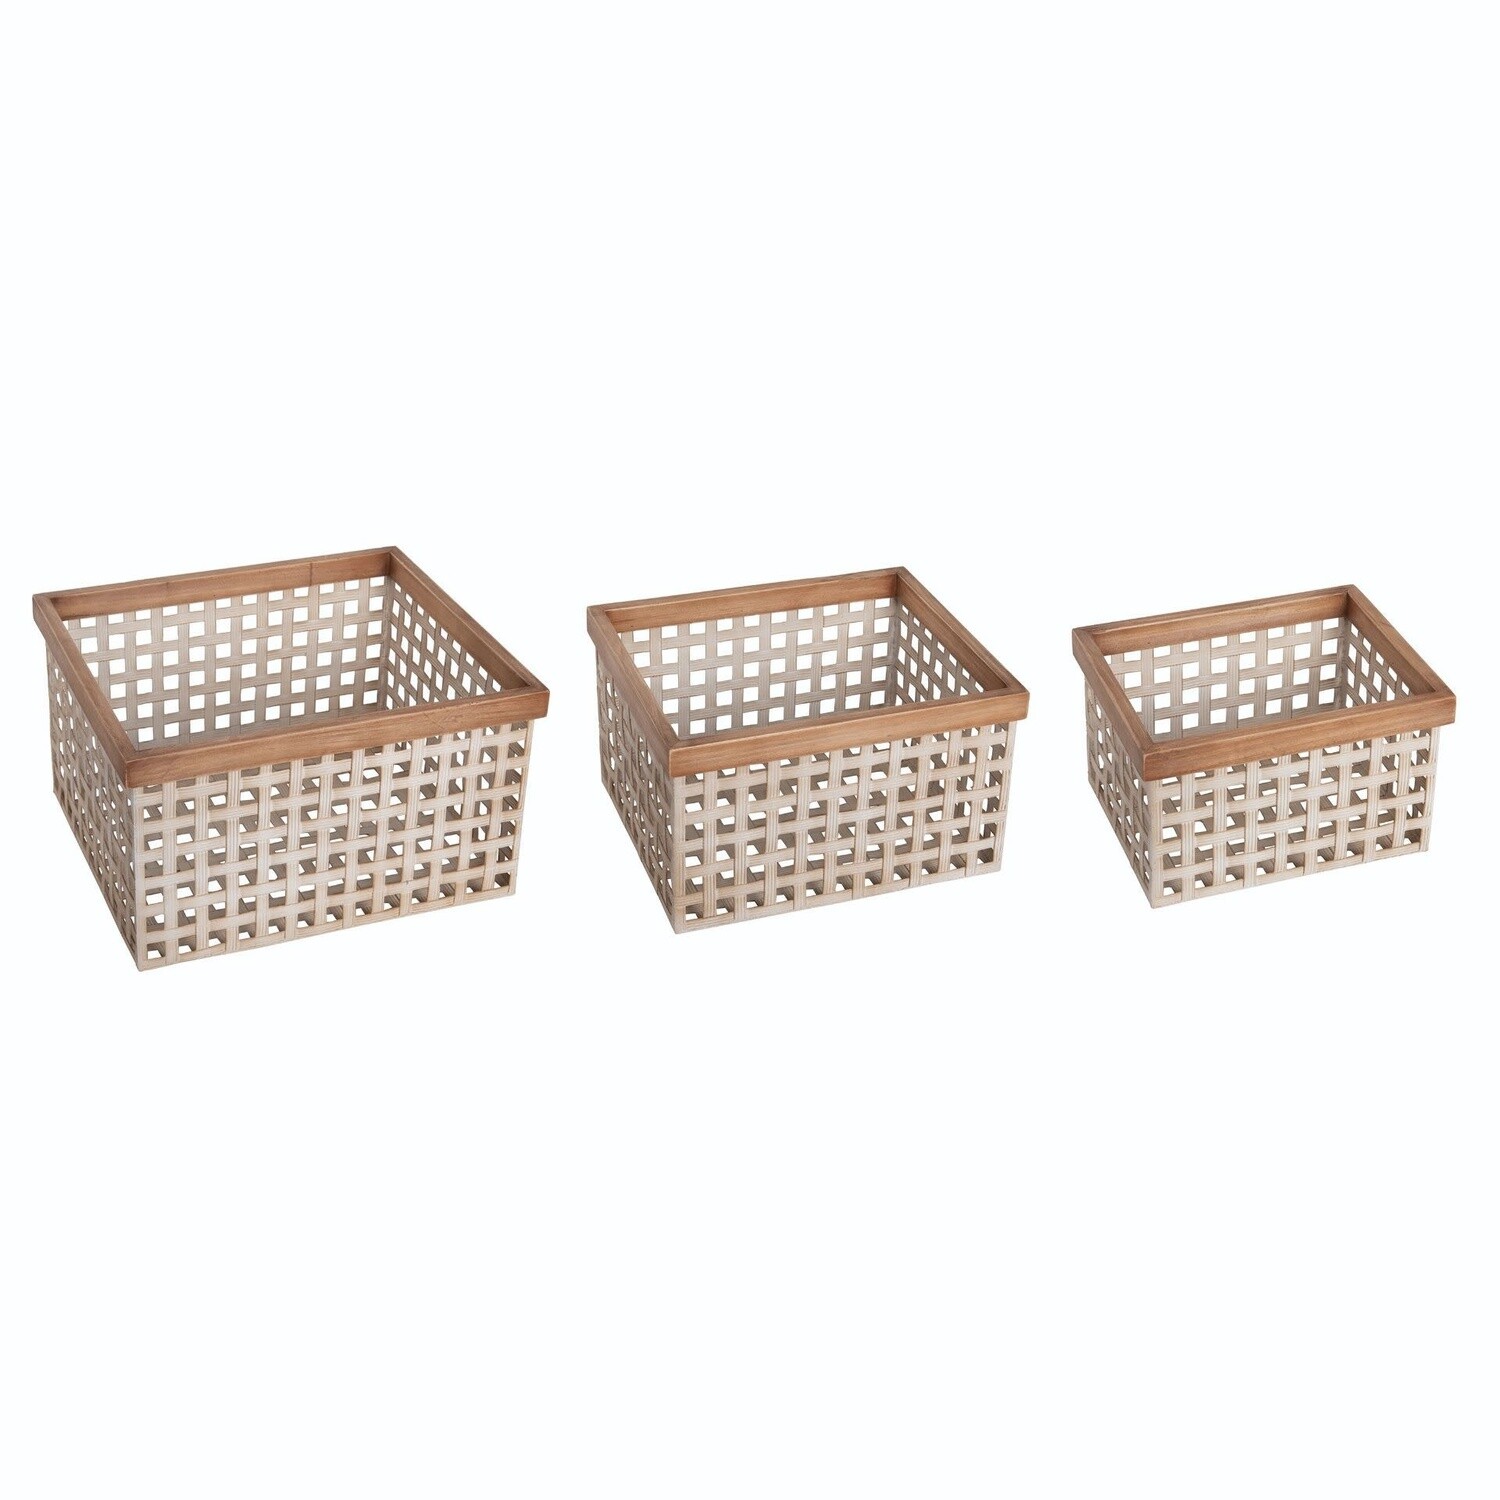 METAL/WOOD WOVEN CONTAINER S/3